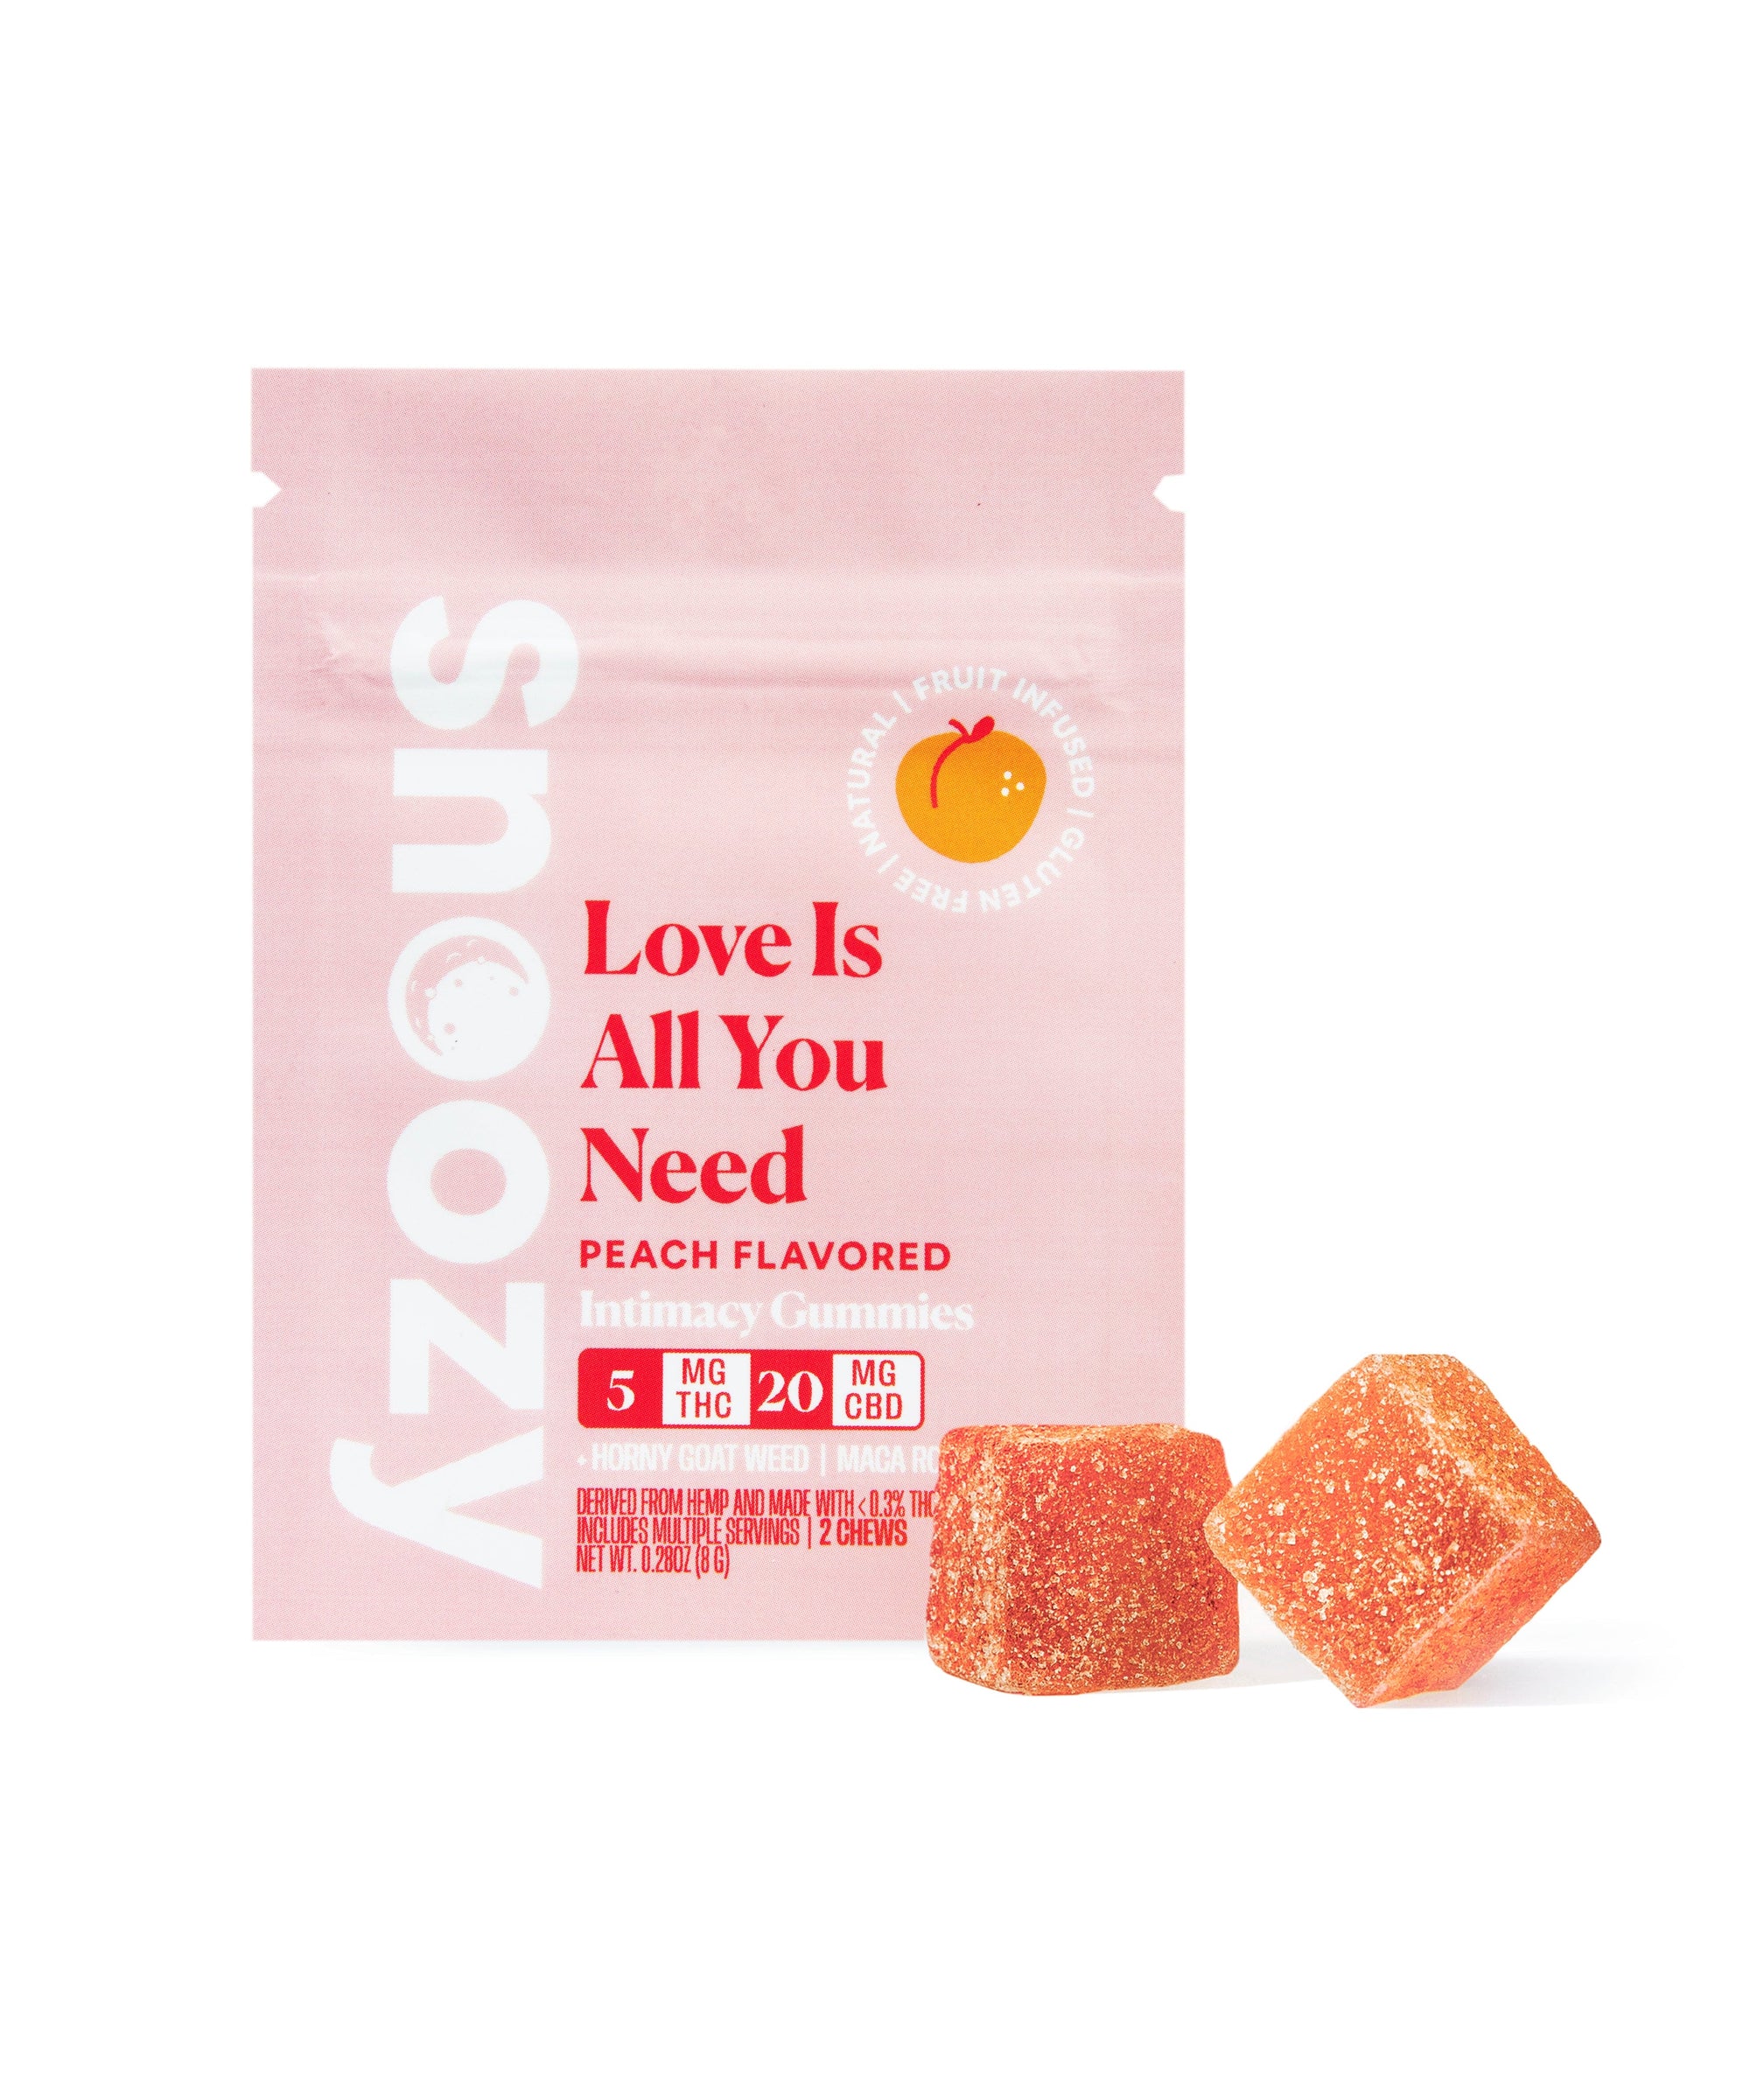 Love Is All You Need: Intimacy Gummies (2 Pack)